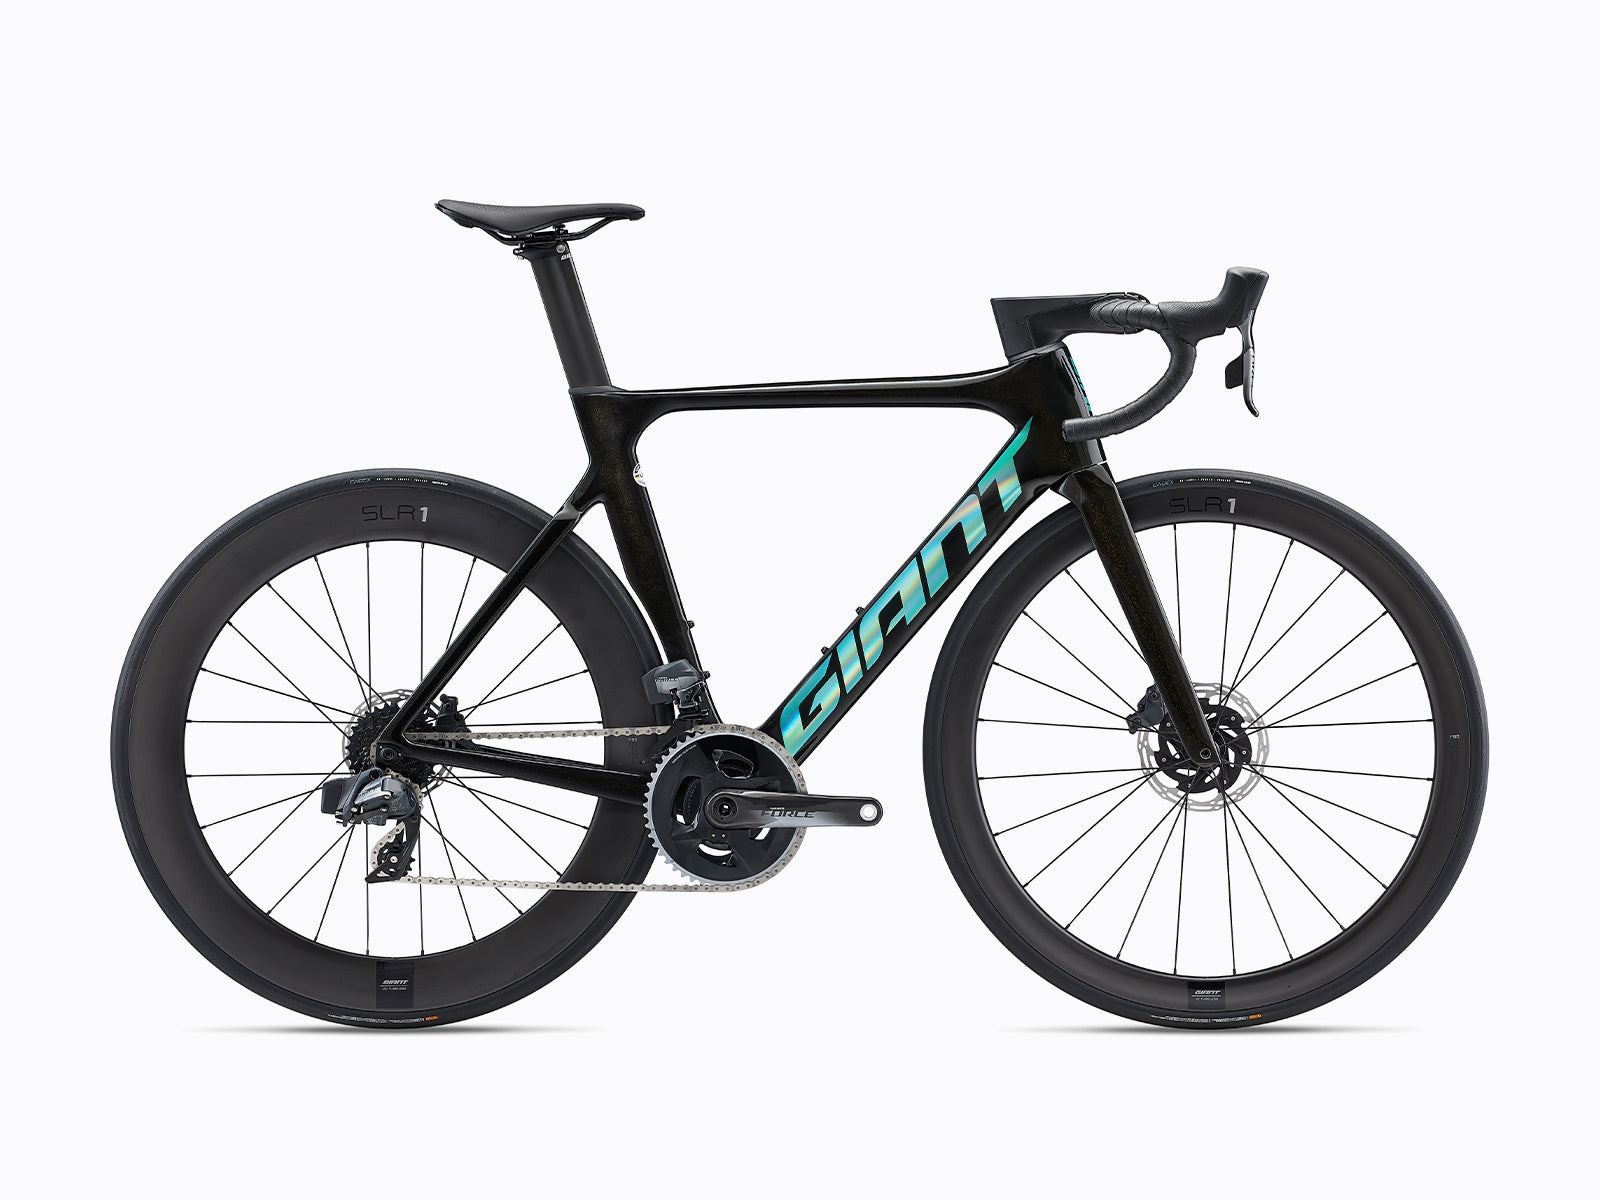 image features the Giant Propel Advanced Pro, a lightweight high performance road bike